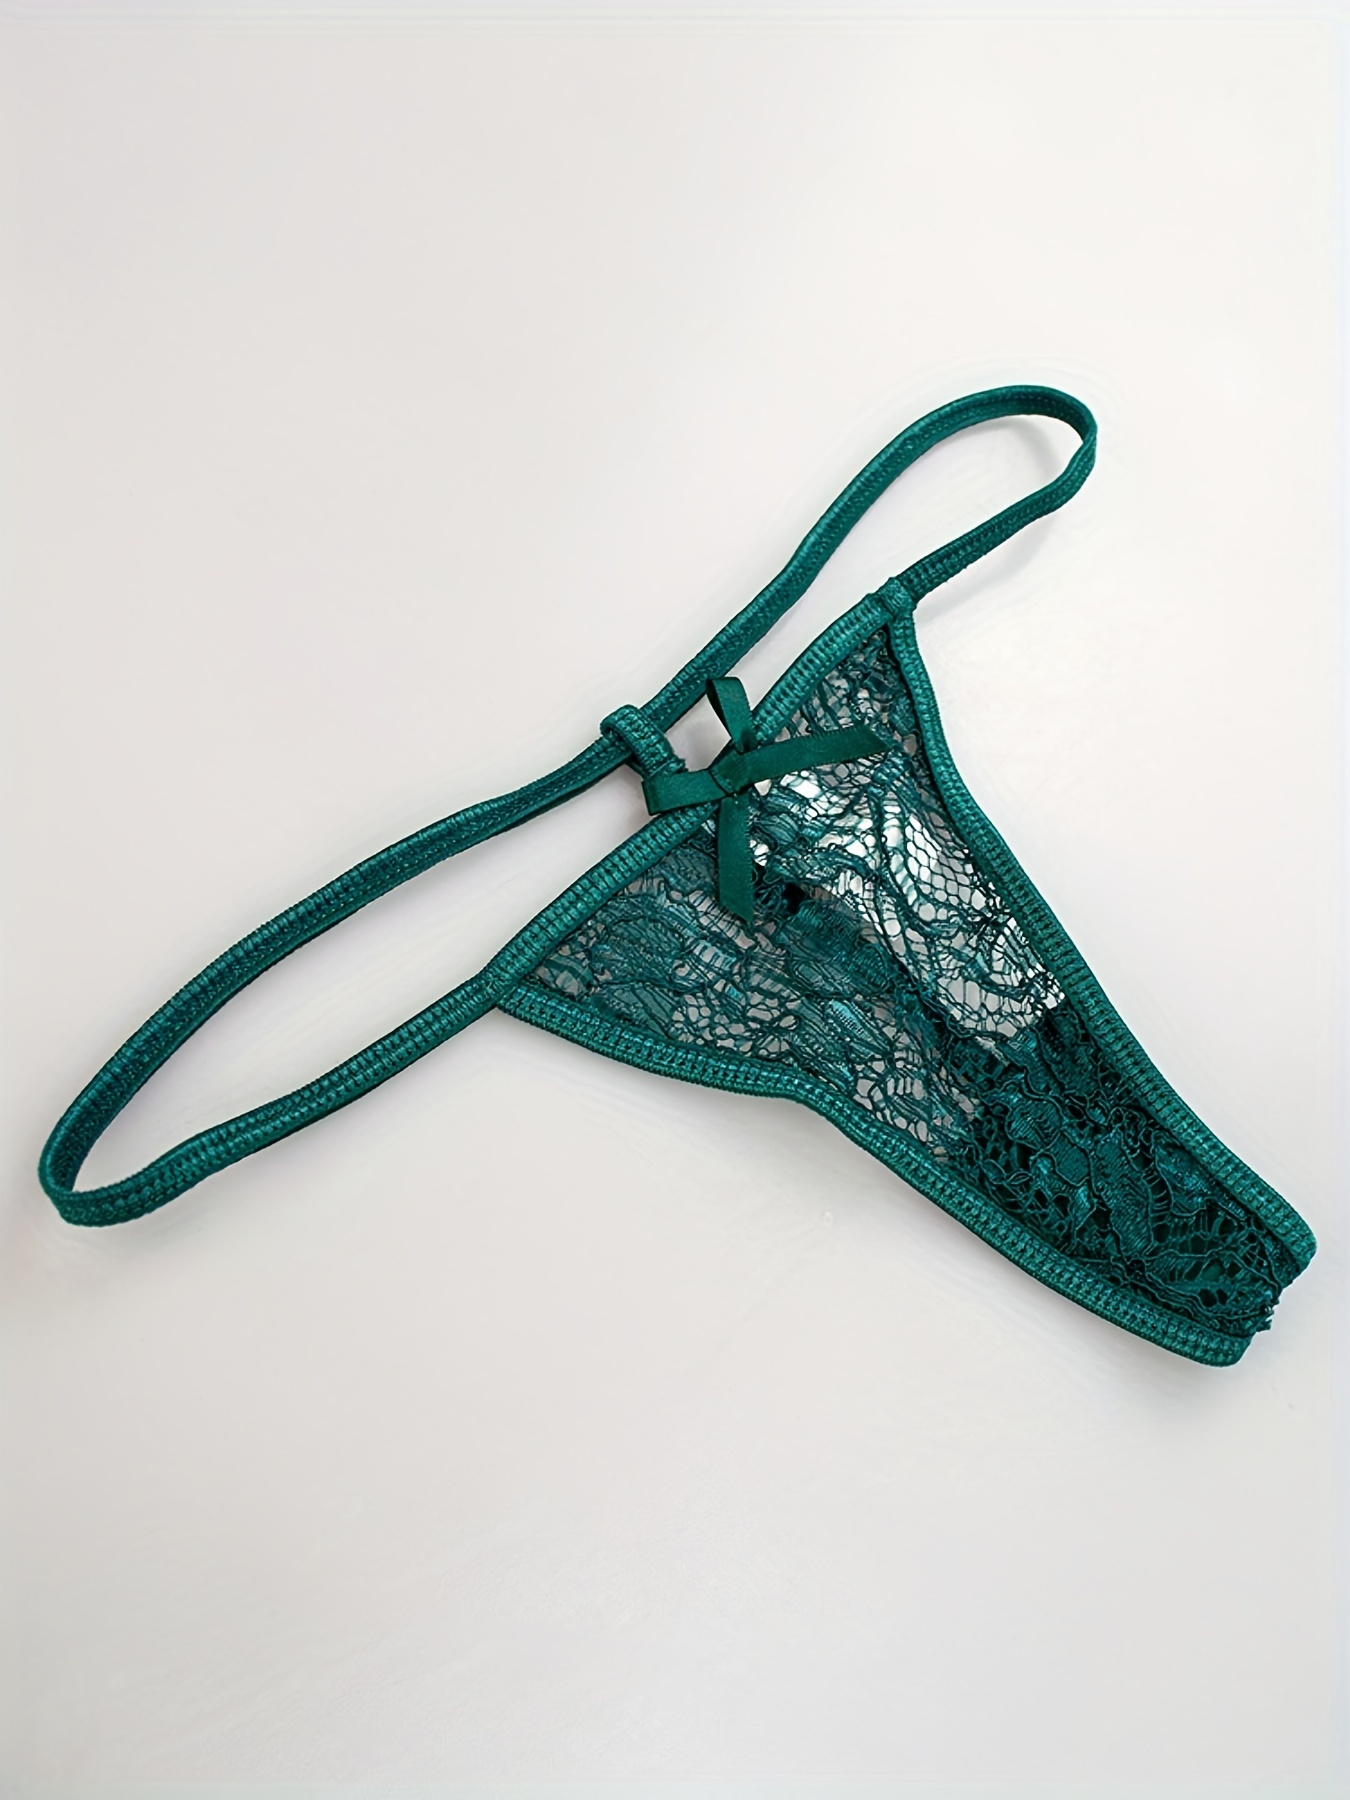 Sheer Green Thong with Shiny Green Stripes & Floral Lace Bands - Large